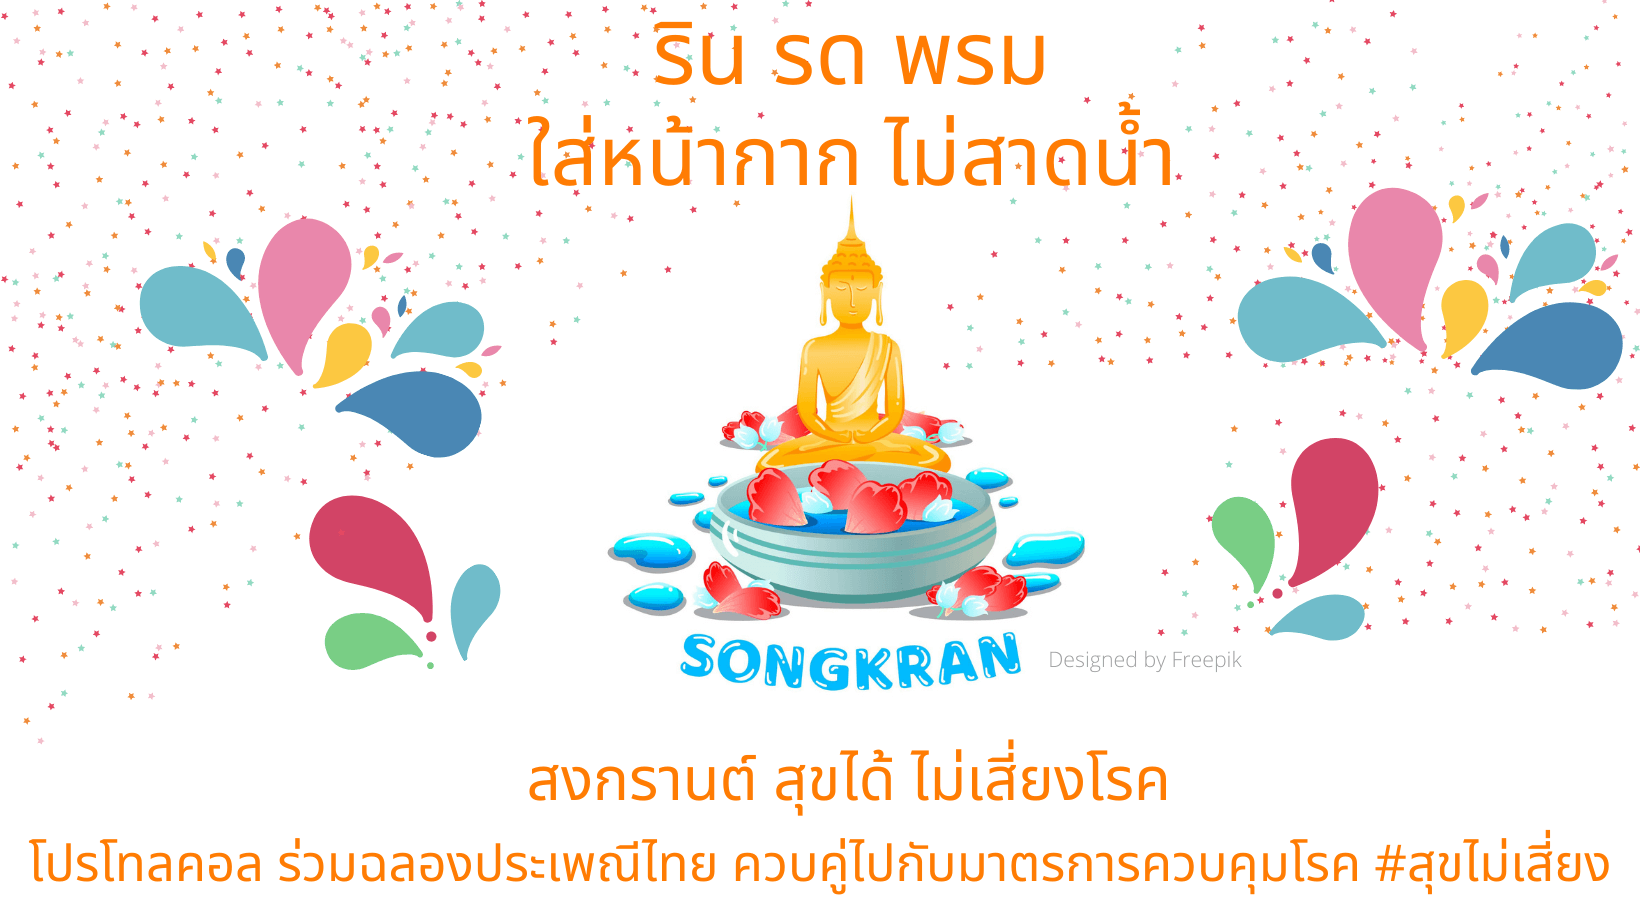 Protollcall wish you safe in Songkran festival 2021